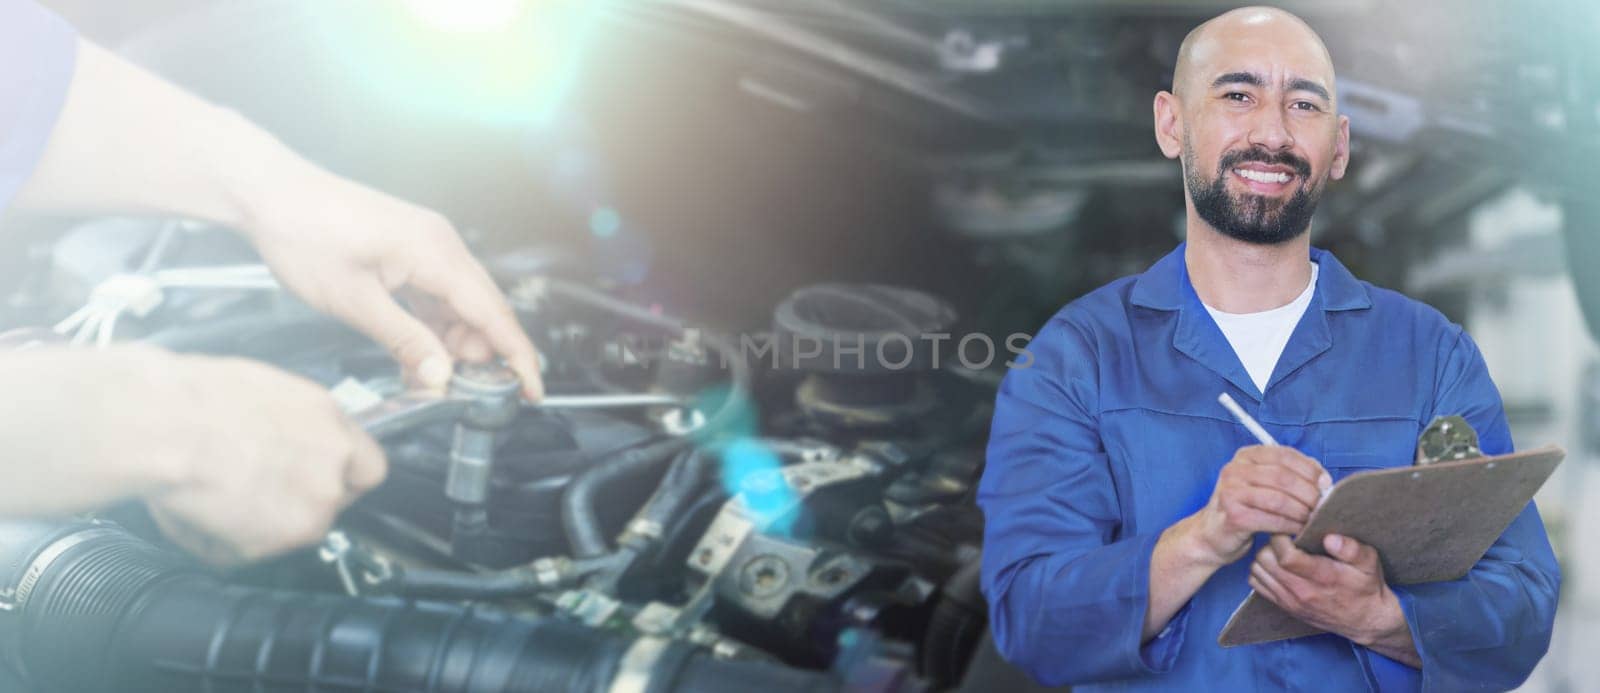 Banner, engine and portrait of a mechanic with notes for auto service, car building and maintenance. Happy, smile and engineer writing paperwork for transportation repairs at a garage workshop.